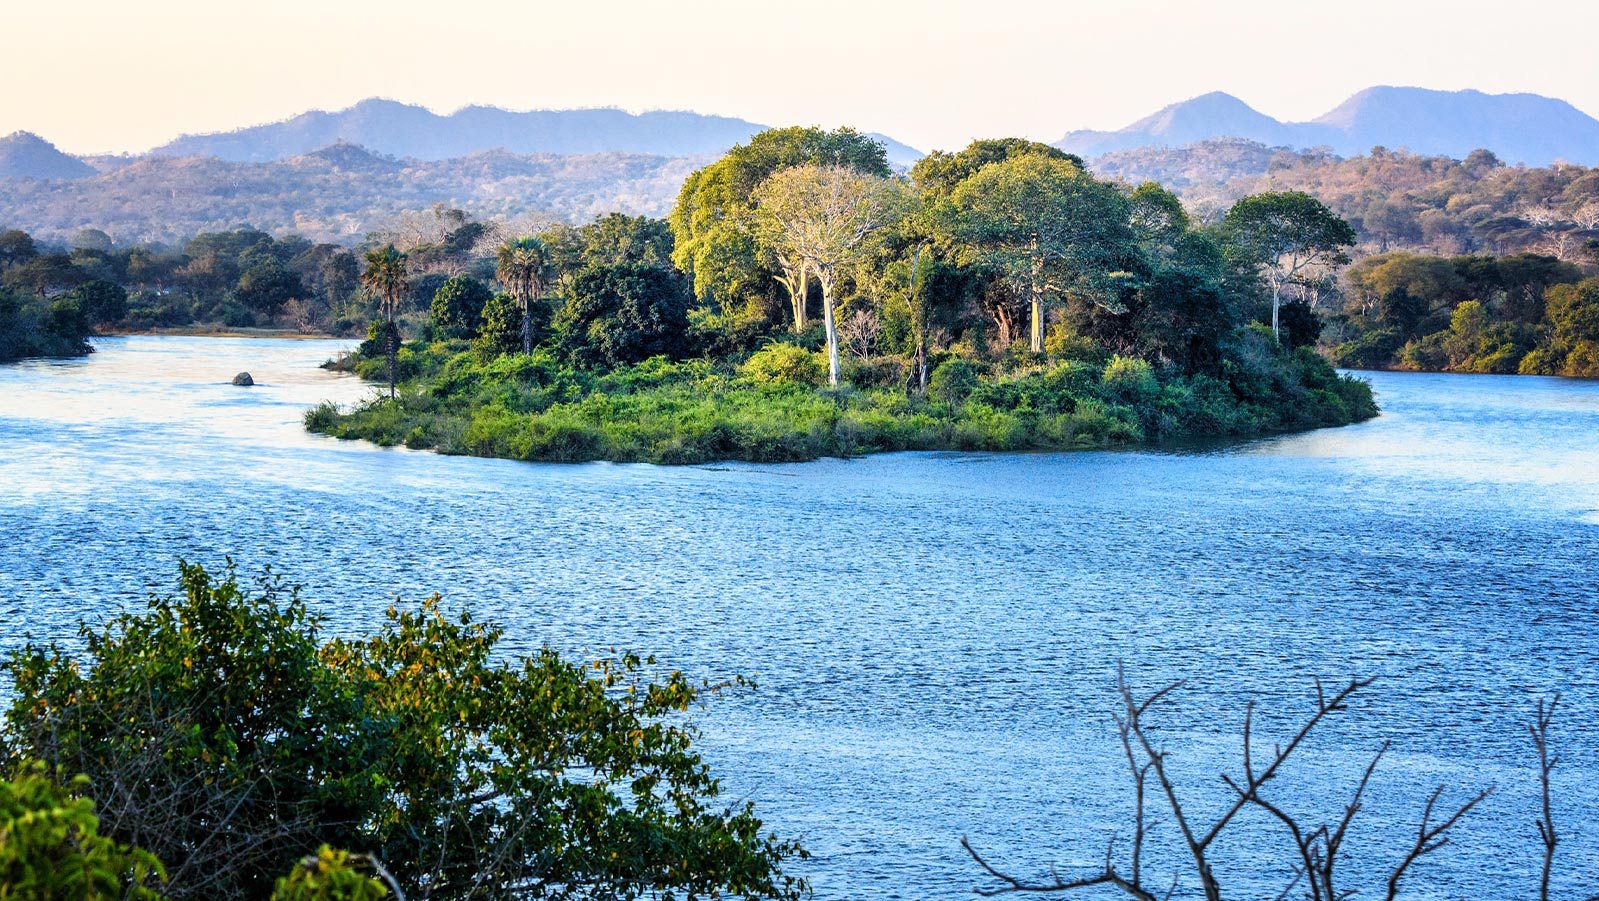 Island surrounded by water in Majete Wildlife Reserve